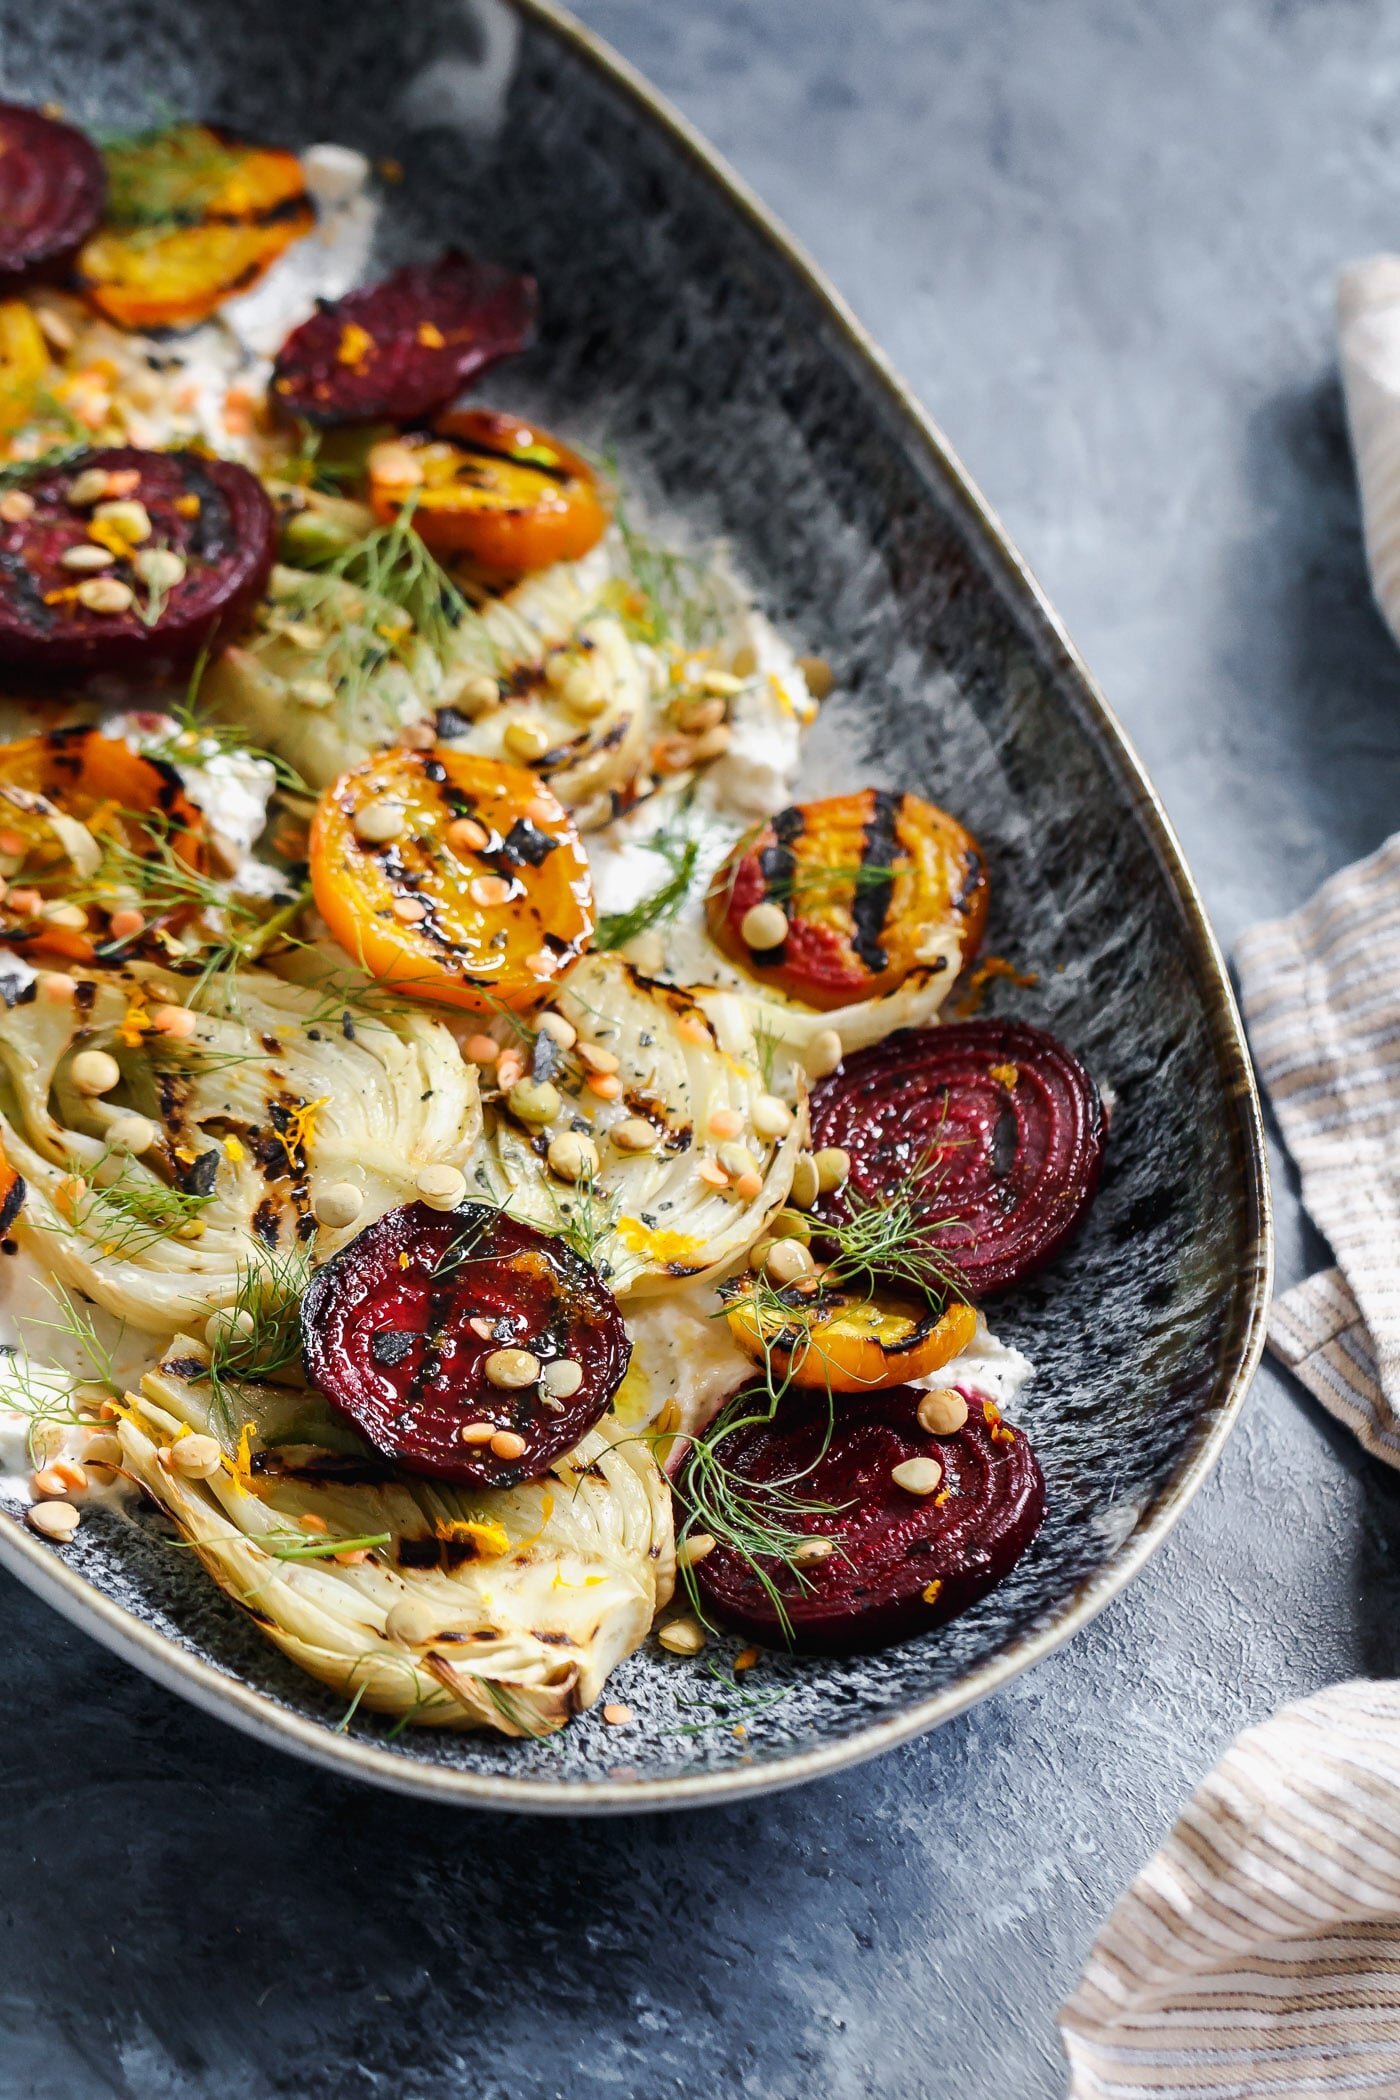 Grilled Beet and Fennel Salad